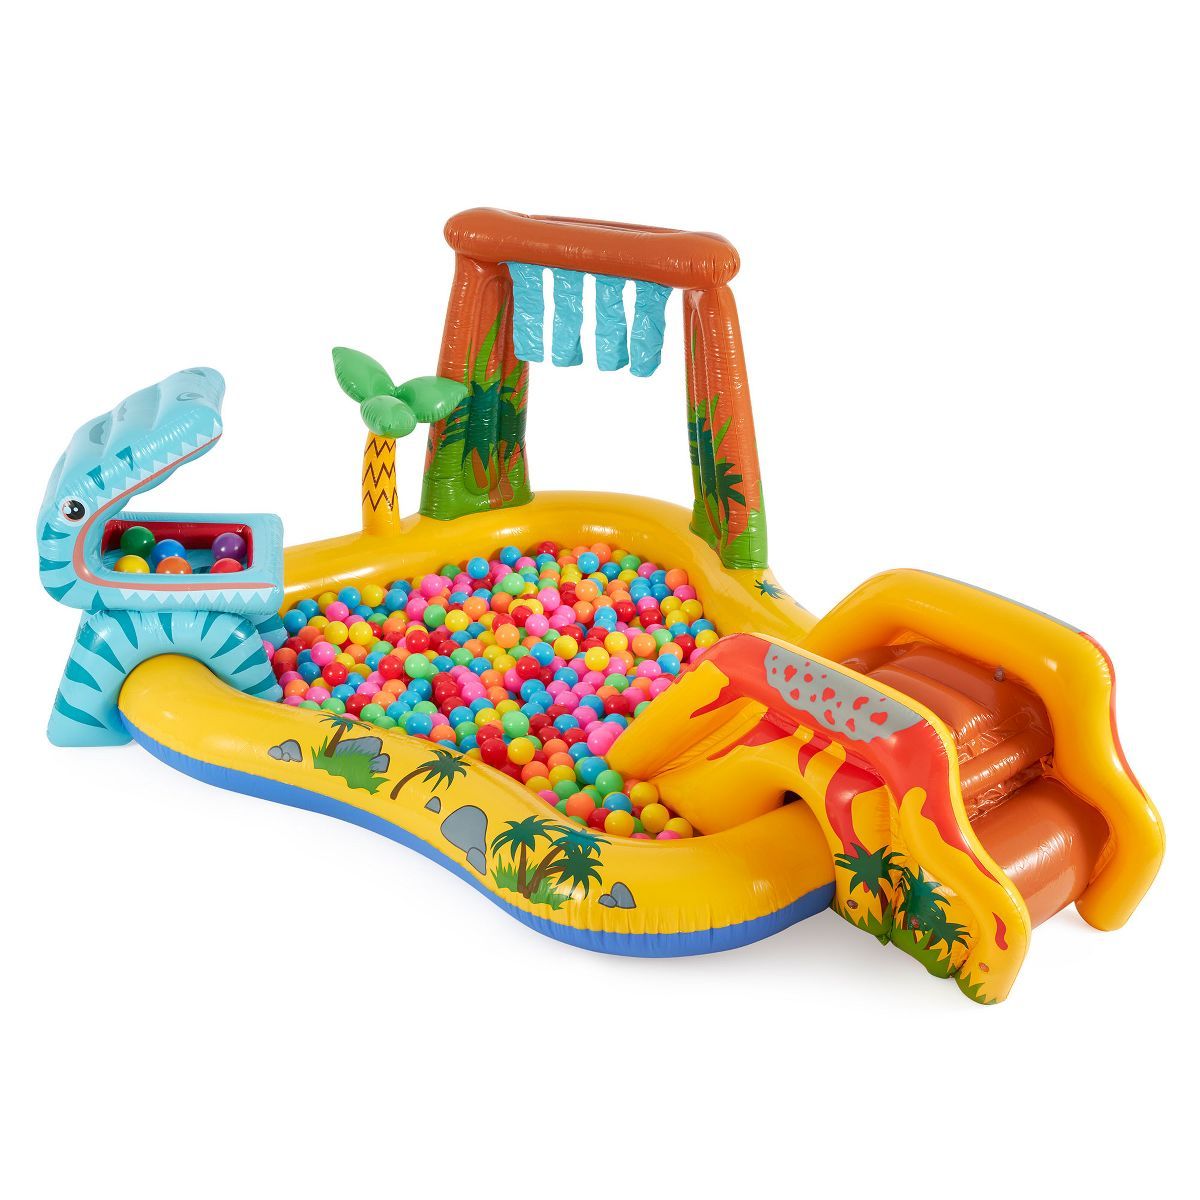 Intex Inflatable Kids Dinosaur Play Center Outdoor Water Park Pool with Slide | Target